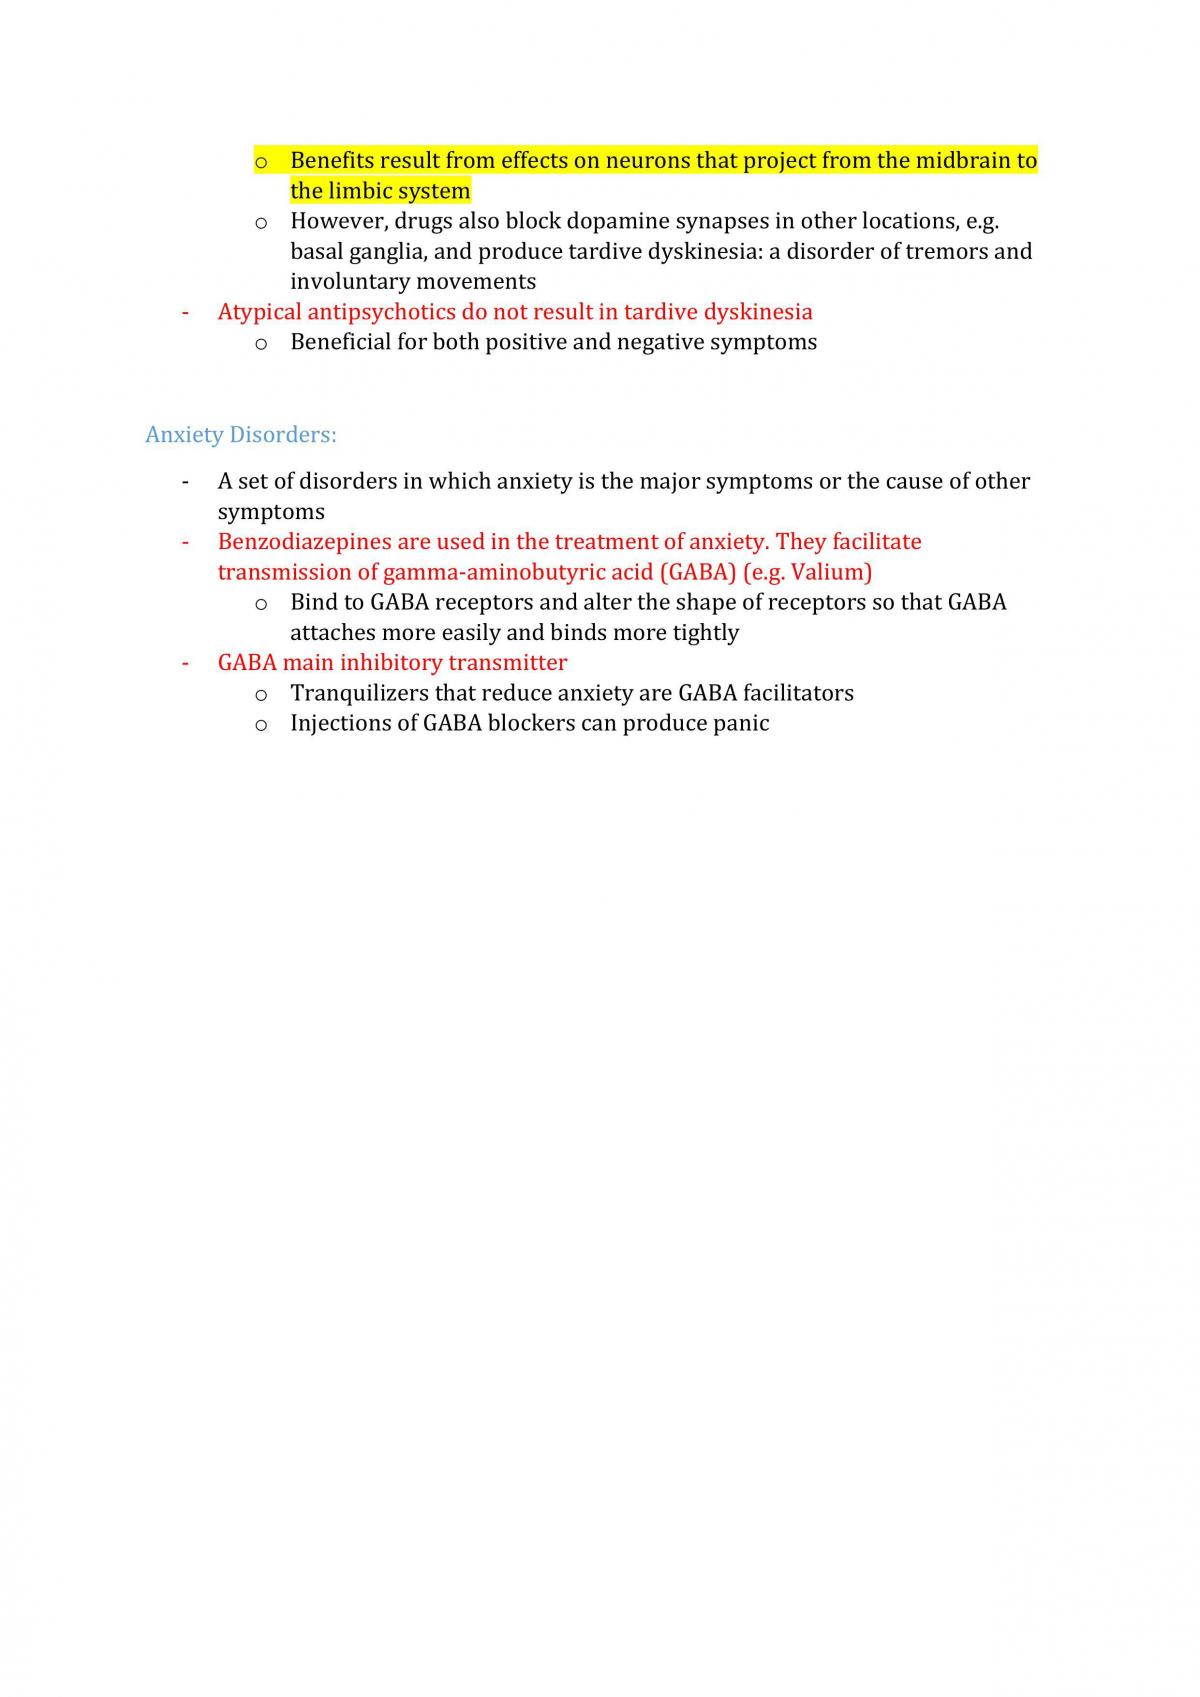 HPS205 - Complete Study Notes - Page 45